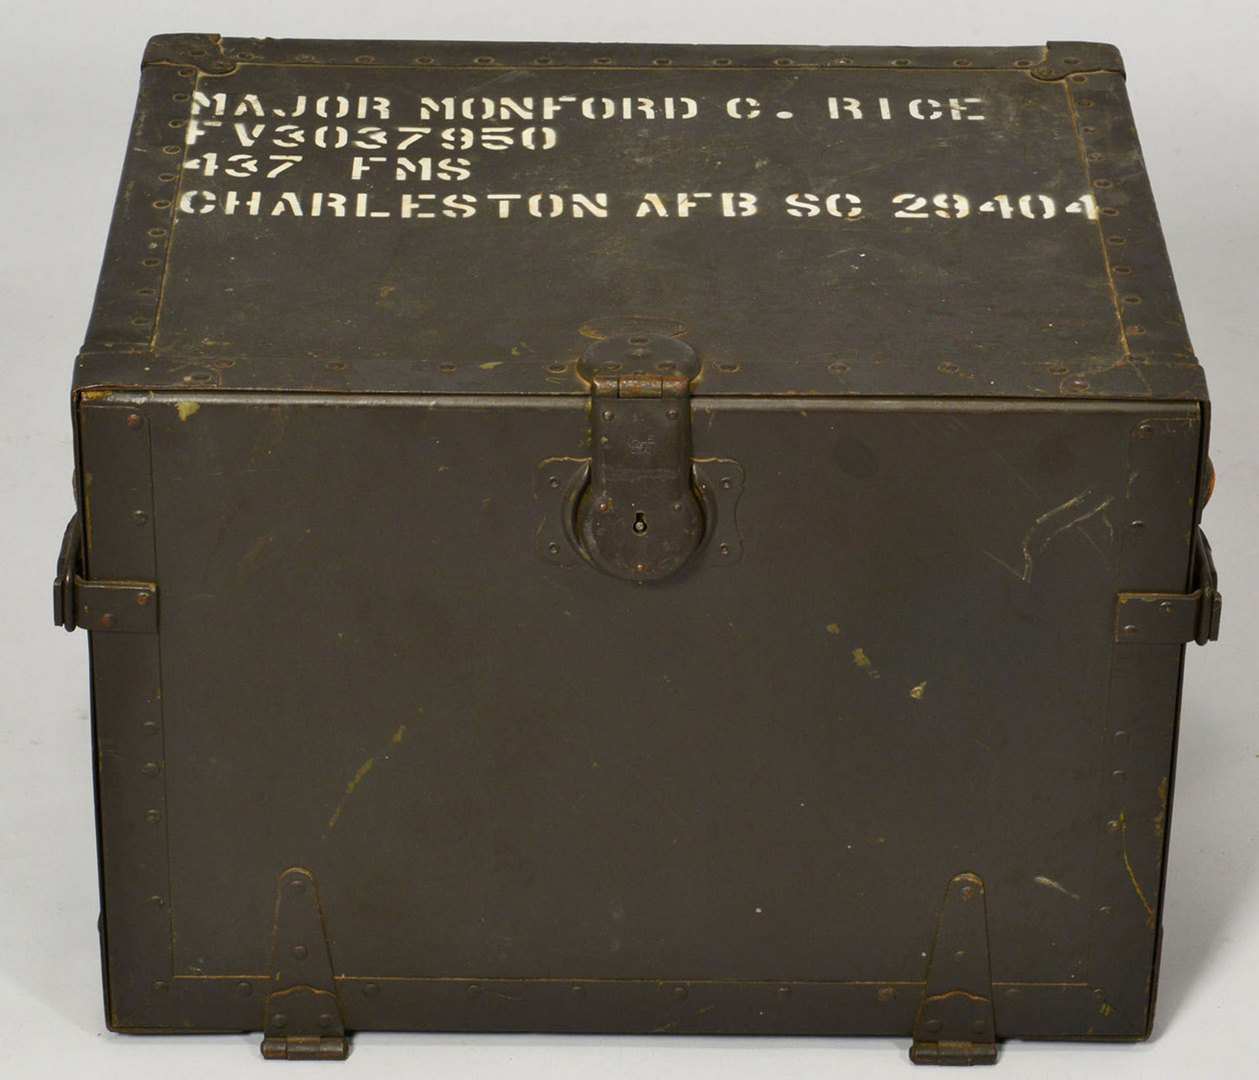 Sold at Auction: WWII US Army Foot Locker Reissued-Dated 1942